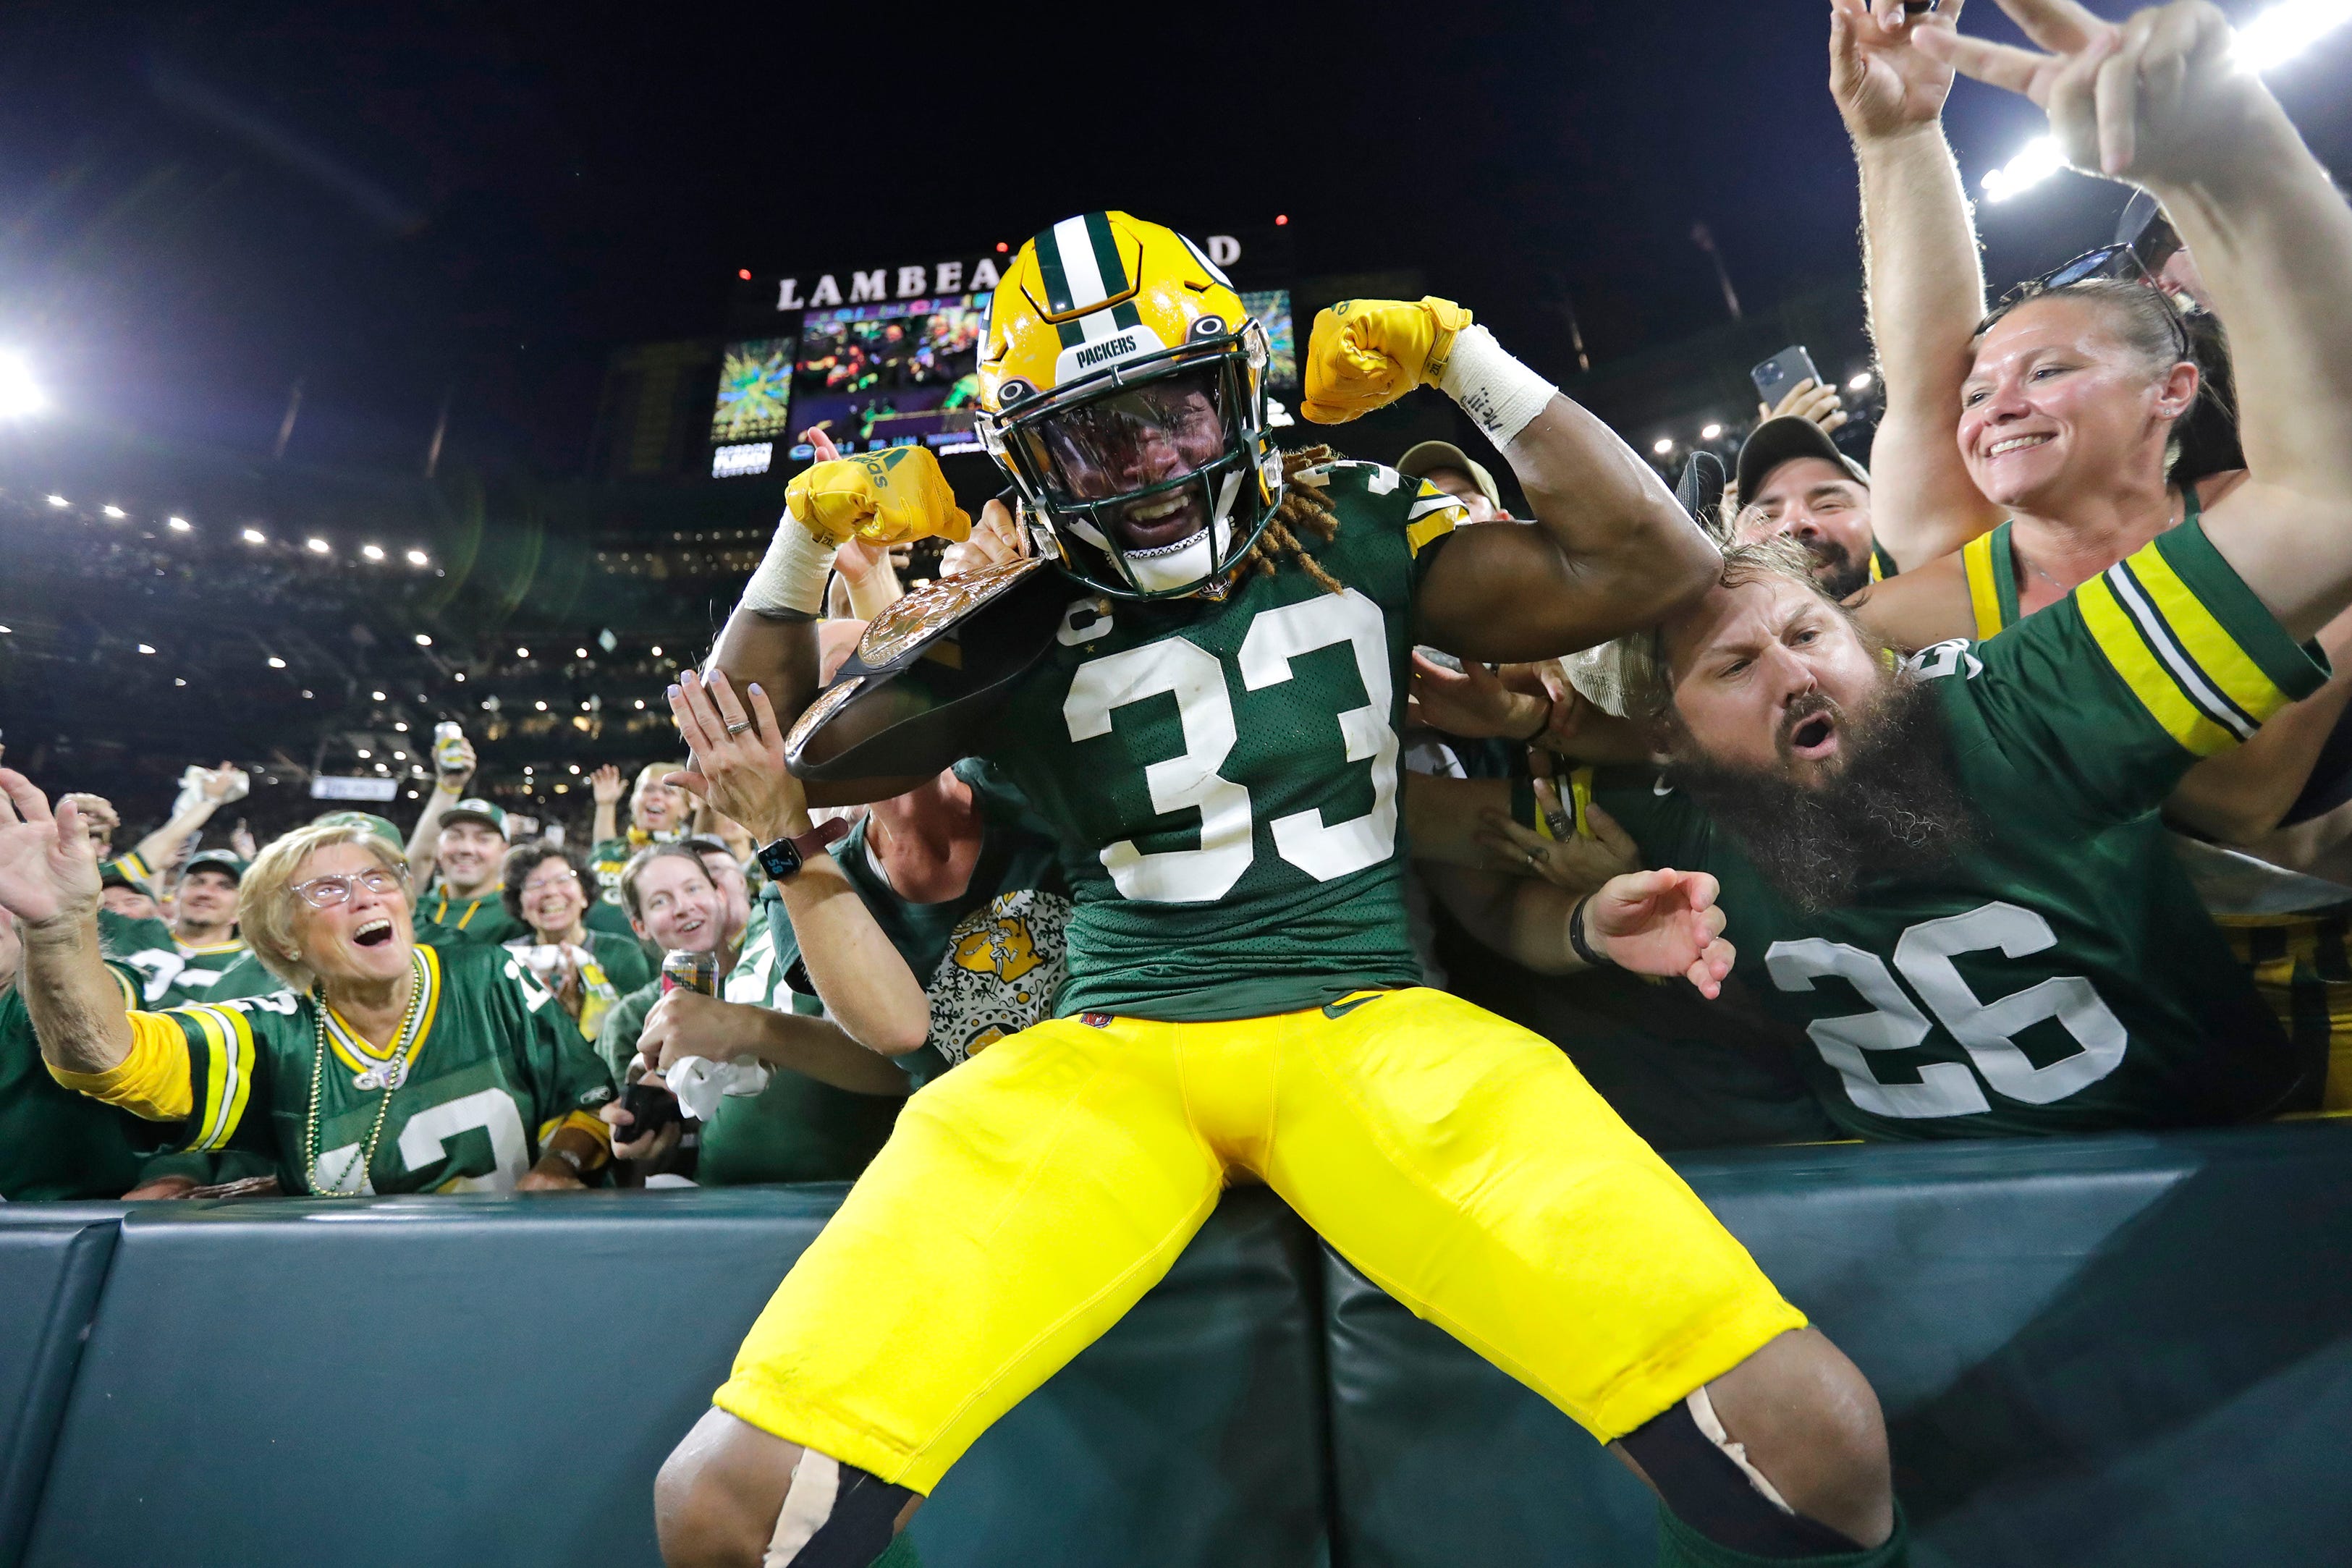 Aaron Jones has one rushing touchdown and three receiving touchdowns so far this year